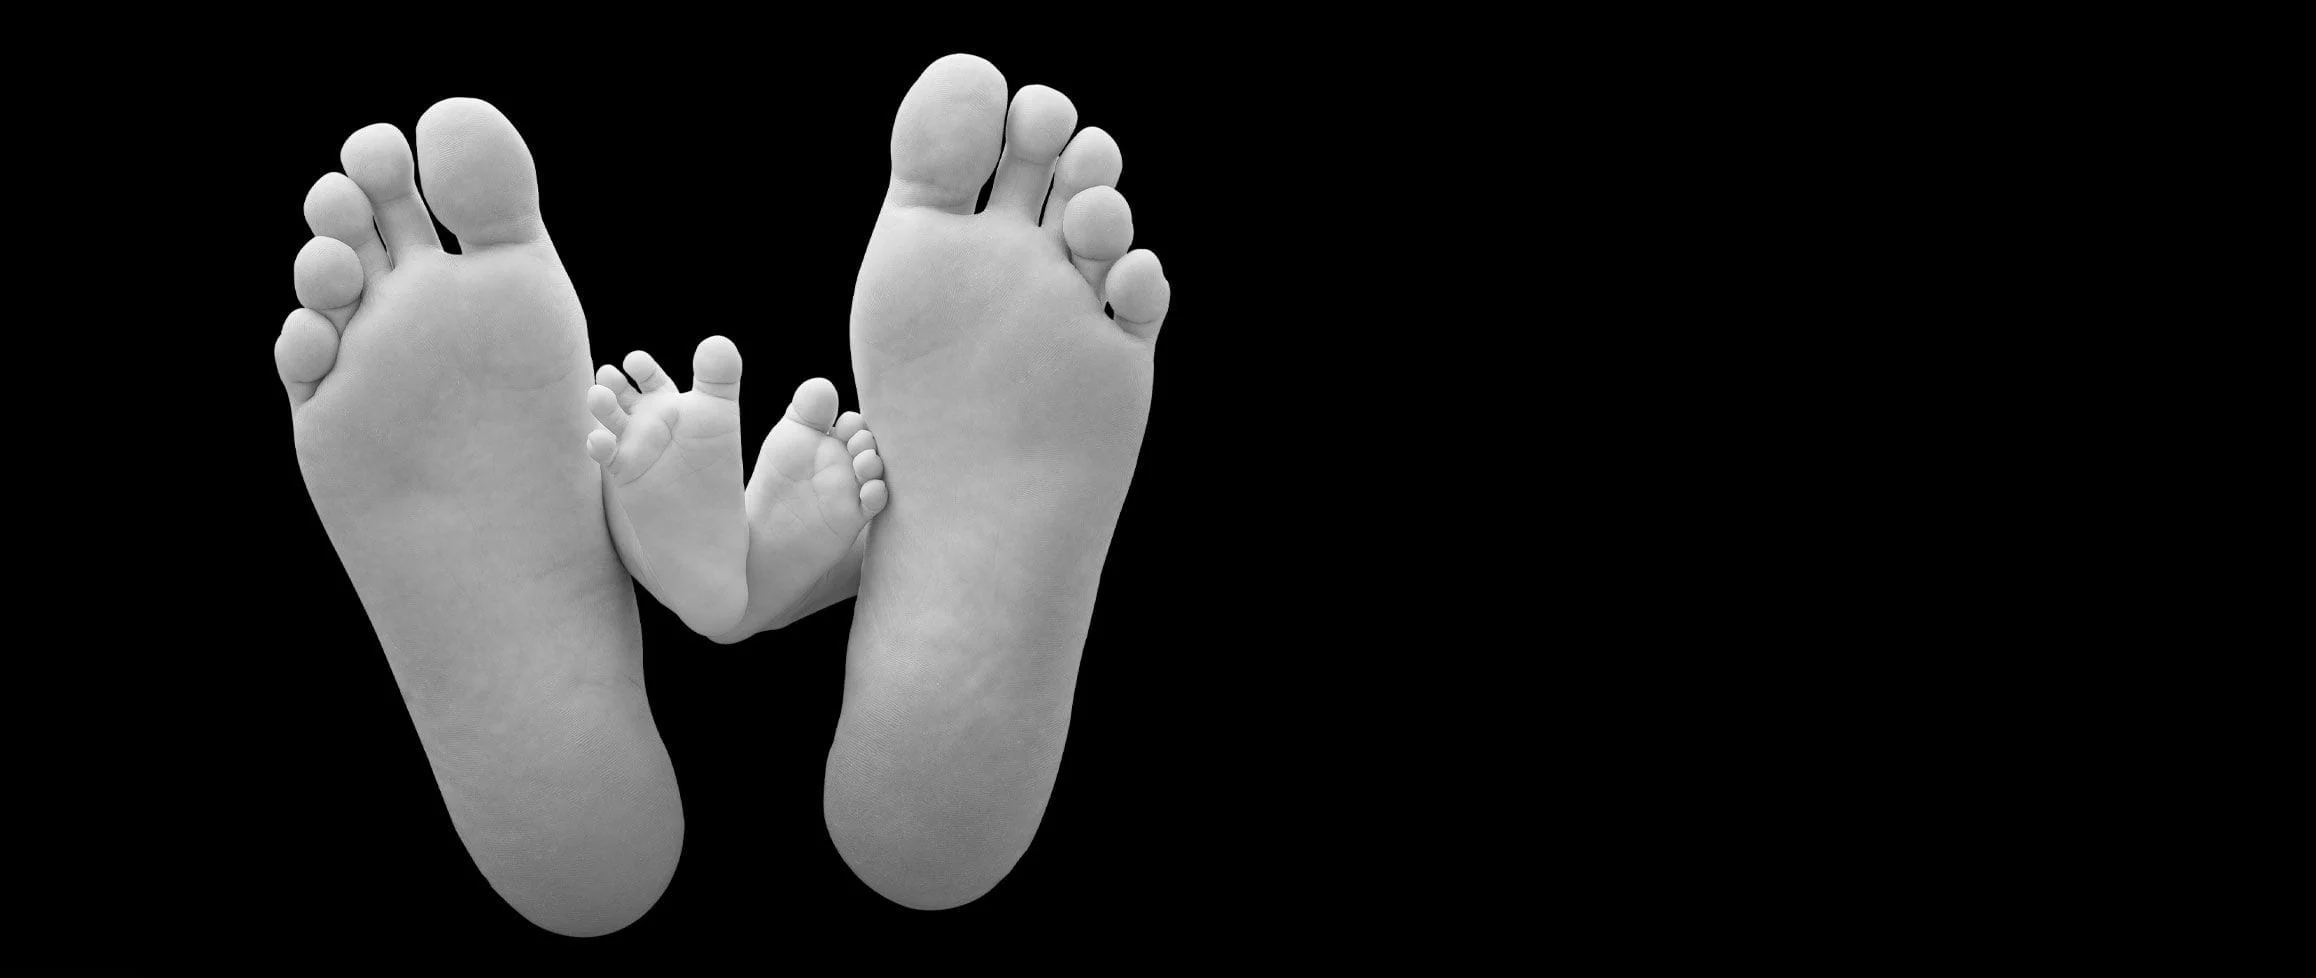 a child and adult foot interwoven